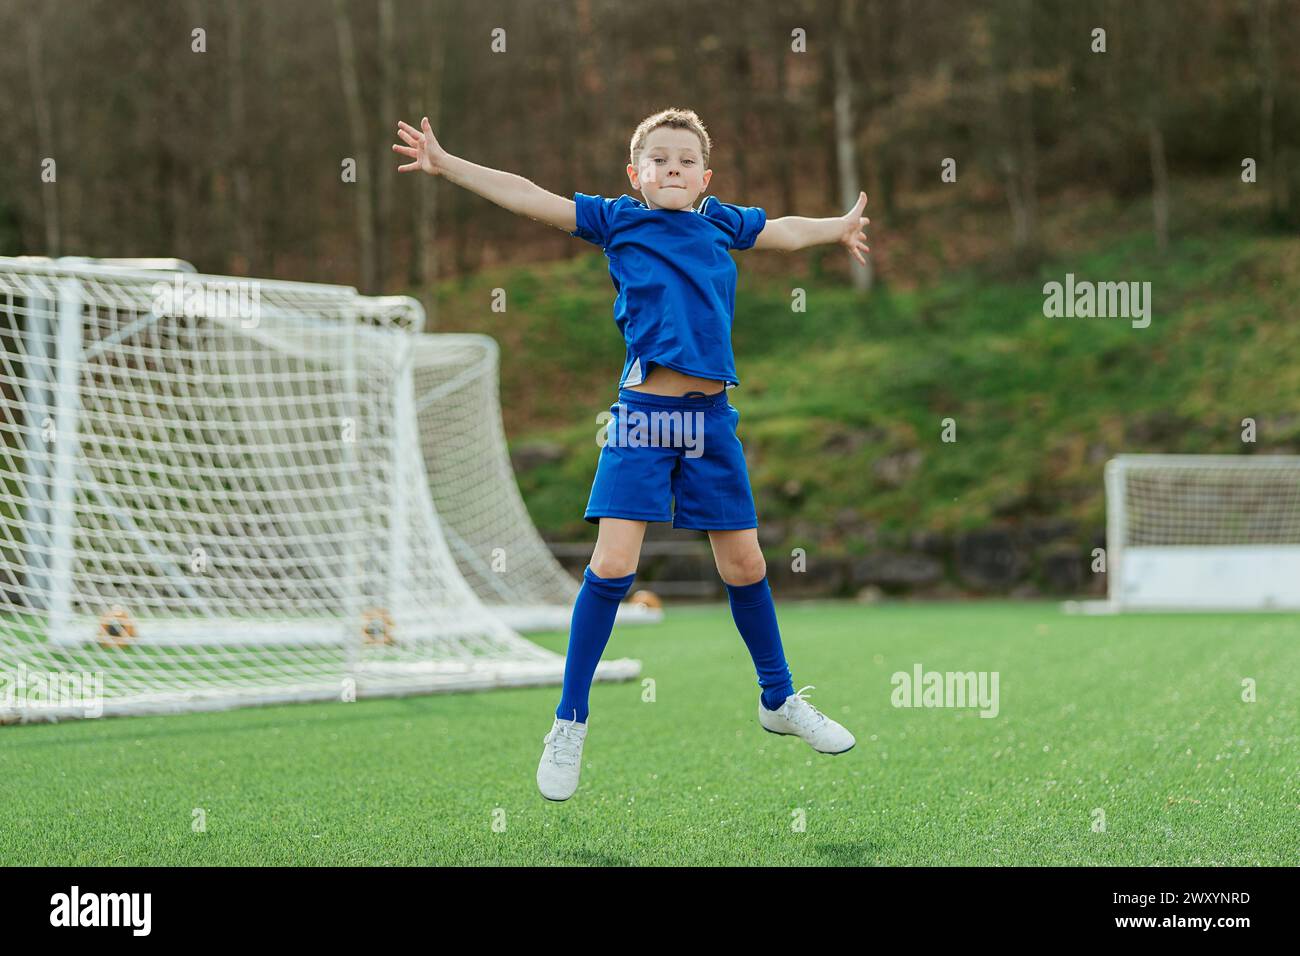 A young boy in a blue soccer uniform joyfully celebrates with arms outstretched on a soccer field, with a goal net in the background Stock Photo